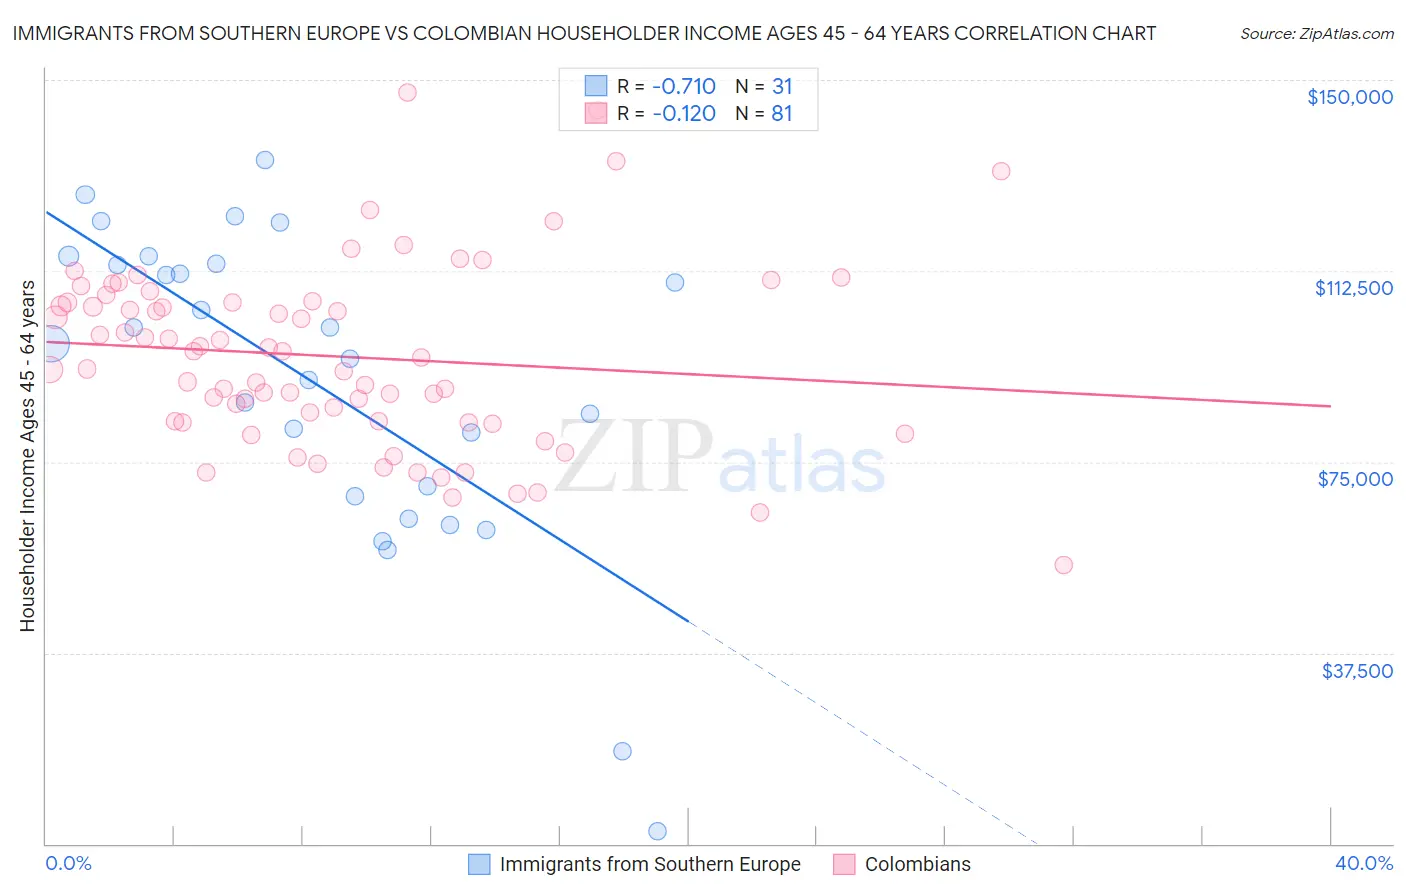 Immigrants from Southern Europe vs Colombian Householder Income Ages 45 - 64 years